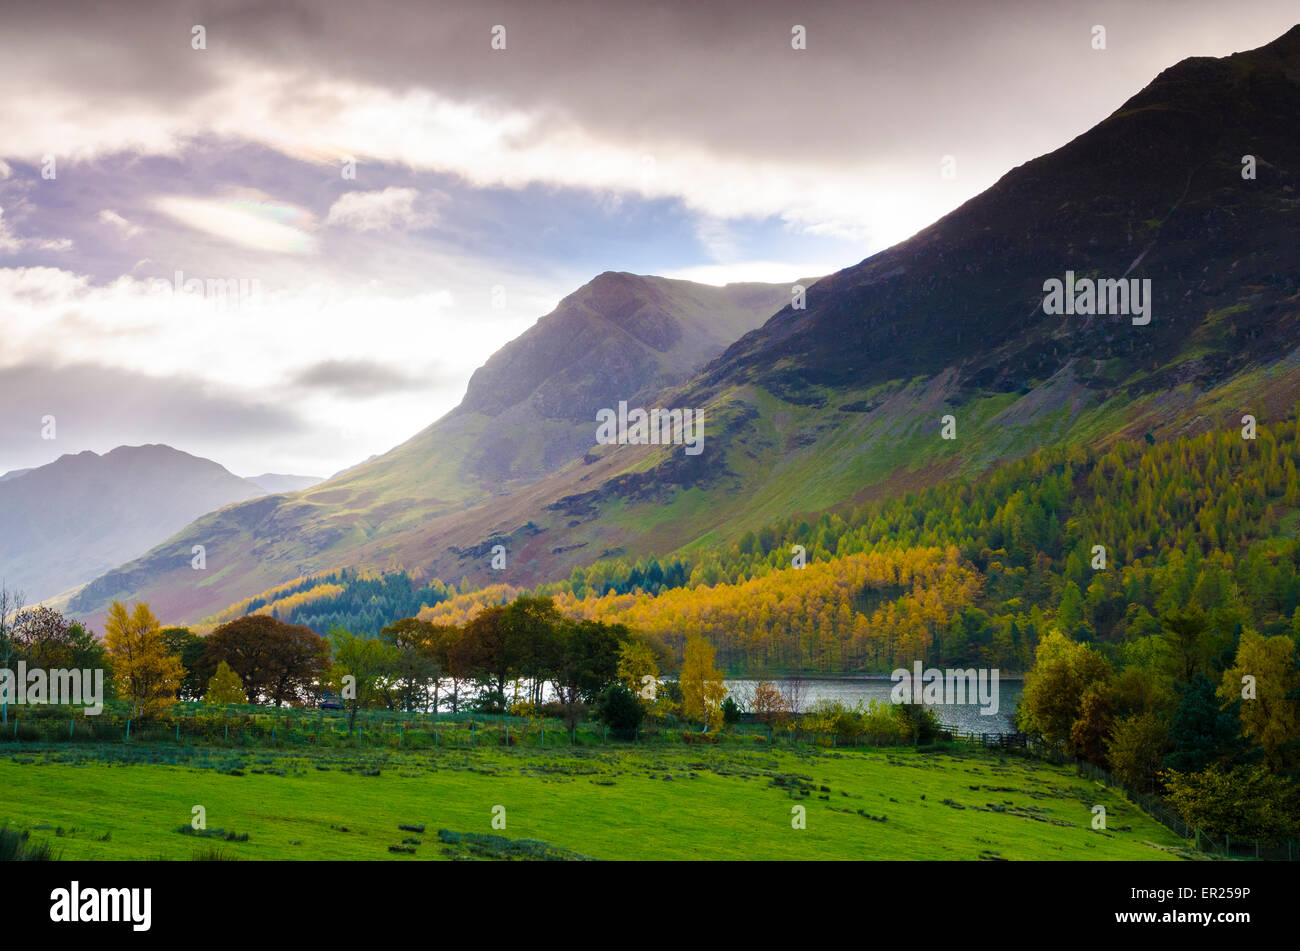 High Crag and Buttermere Fell in the Lake District, Cumbria, England. Stock Photo